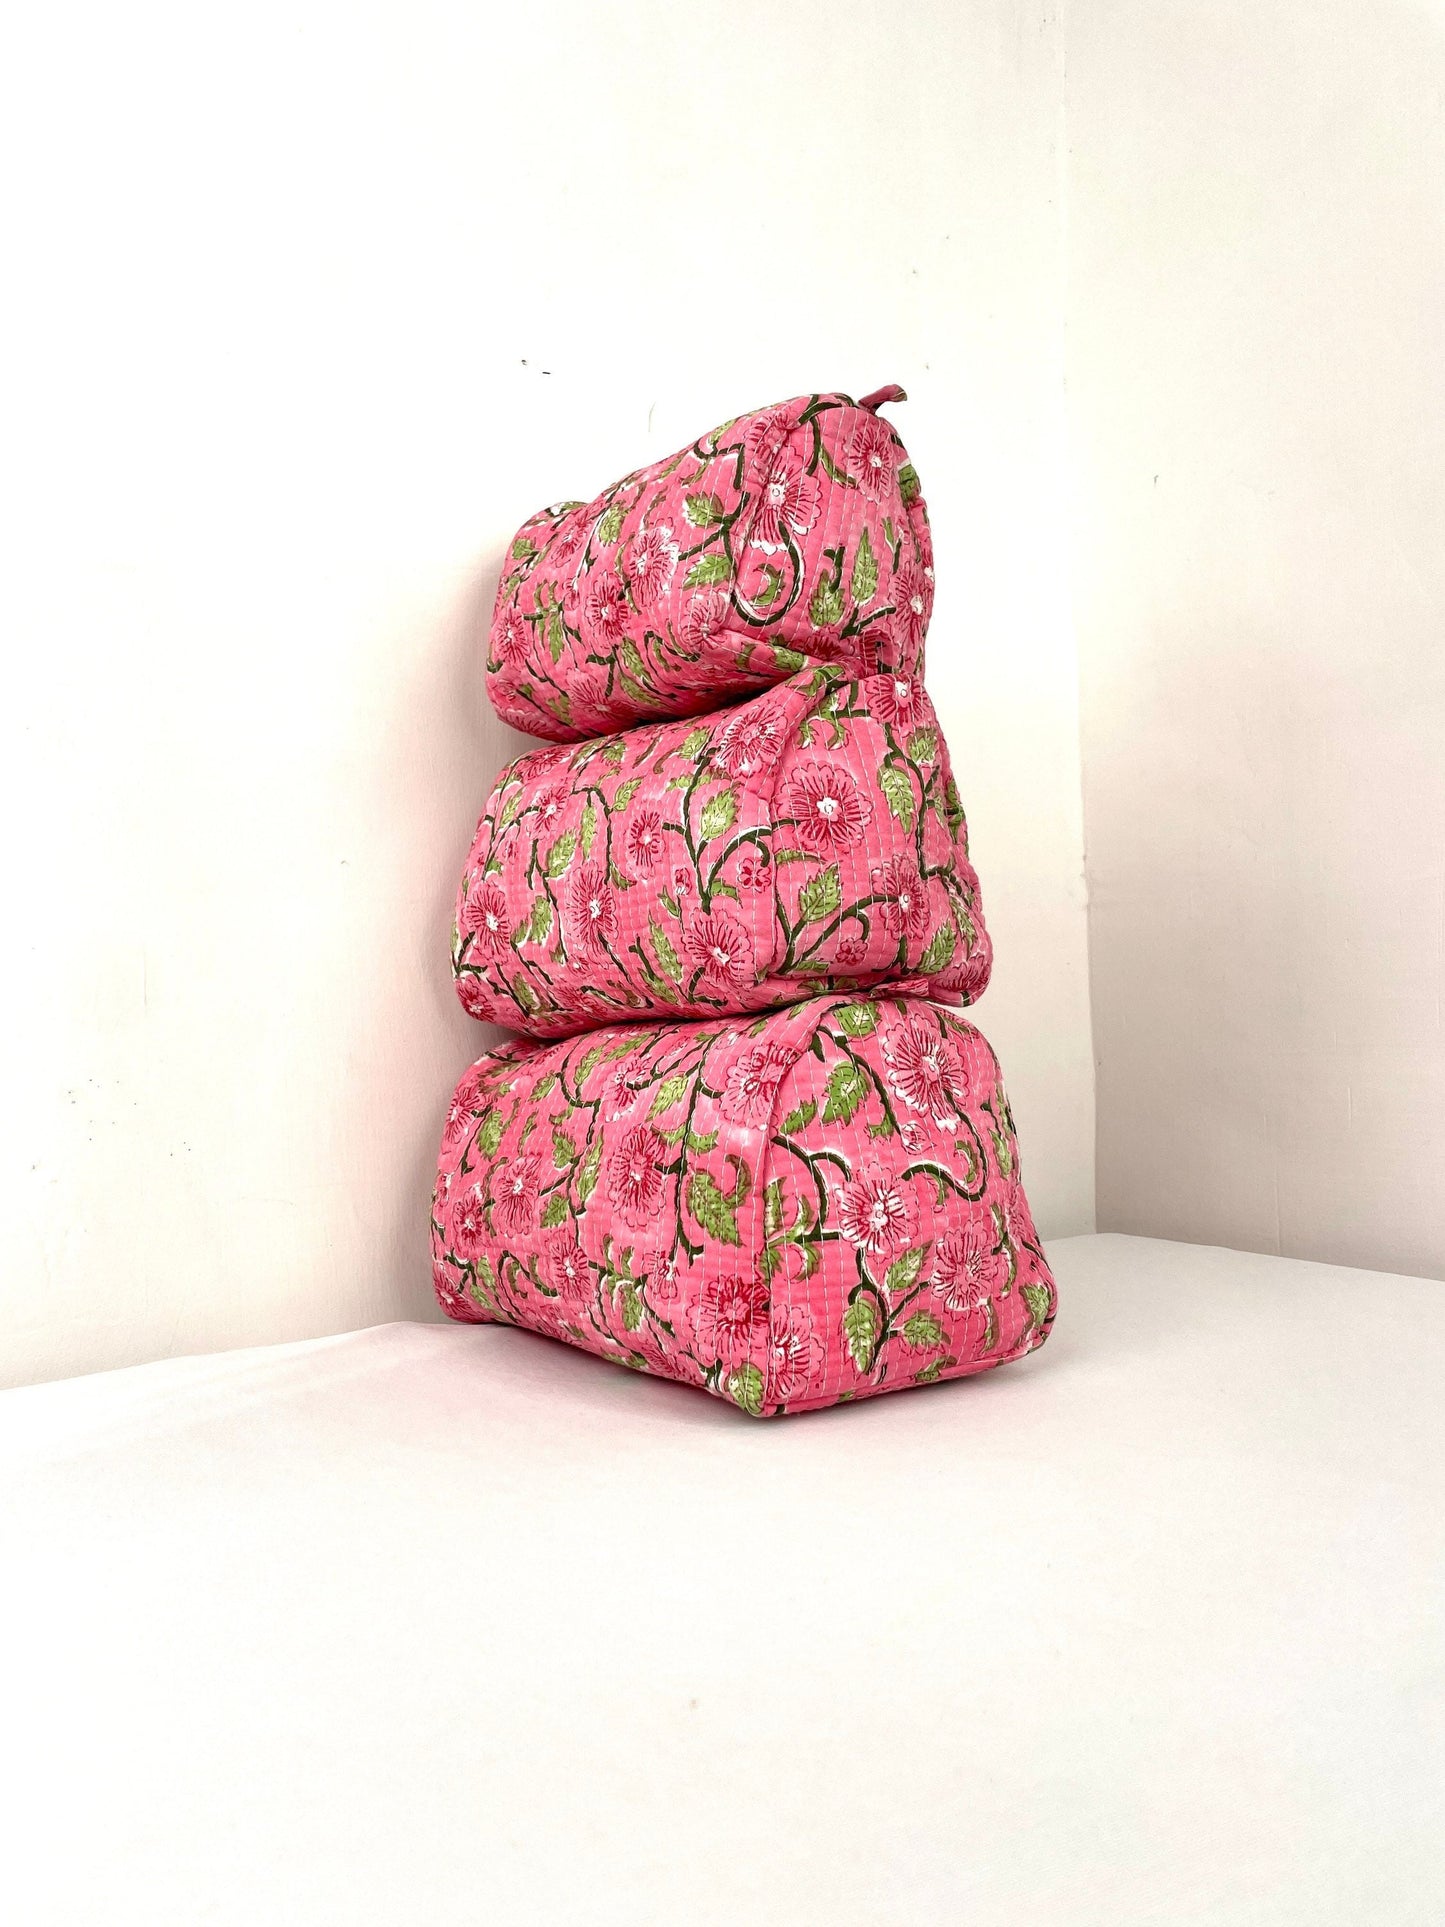 Pack of 3 Organic Cotton Quilted Toiletry Bag, Elegant Floral Hand block Print Wash Bag, Pink Makeup Bag, Gift for her, Mother's Day Gift